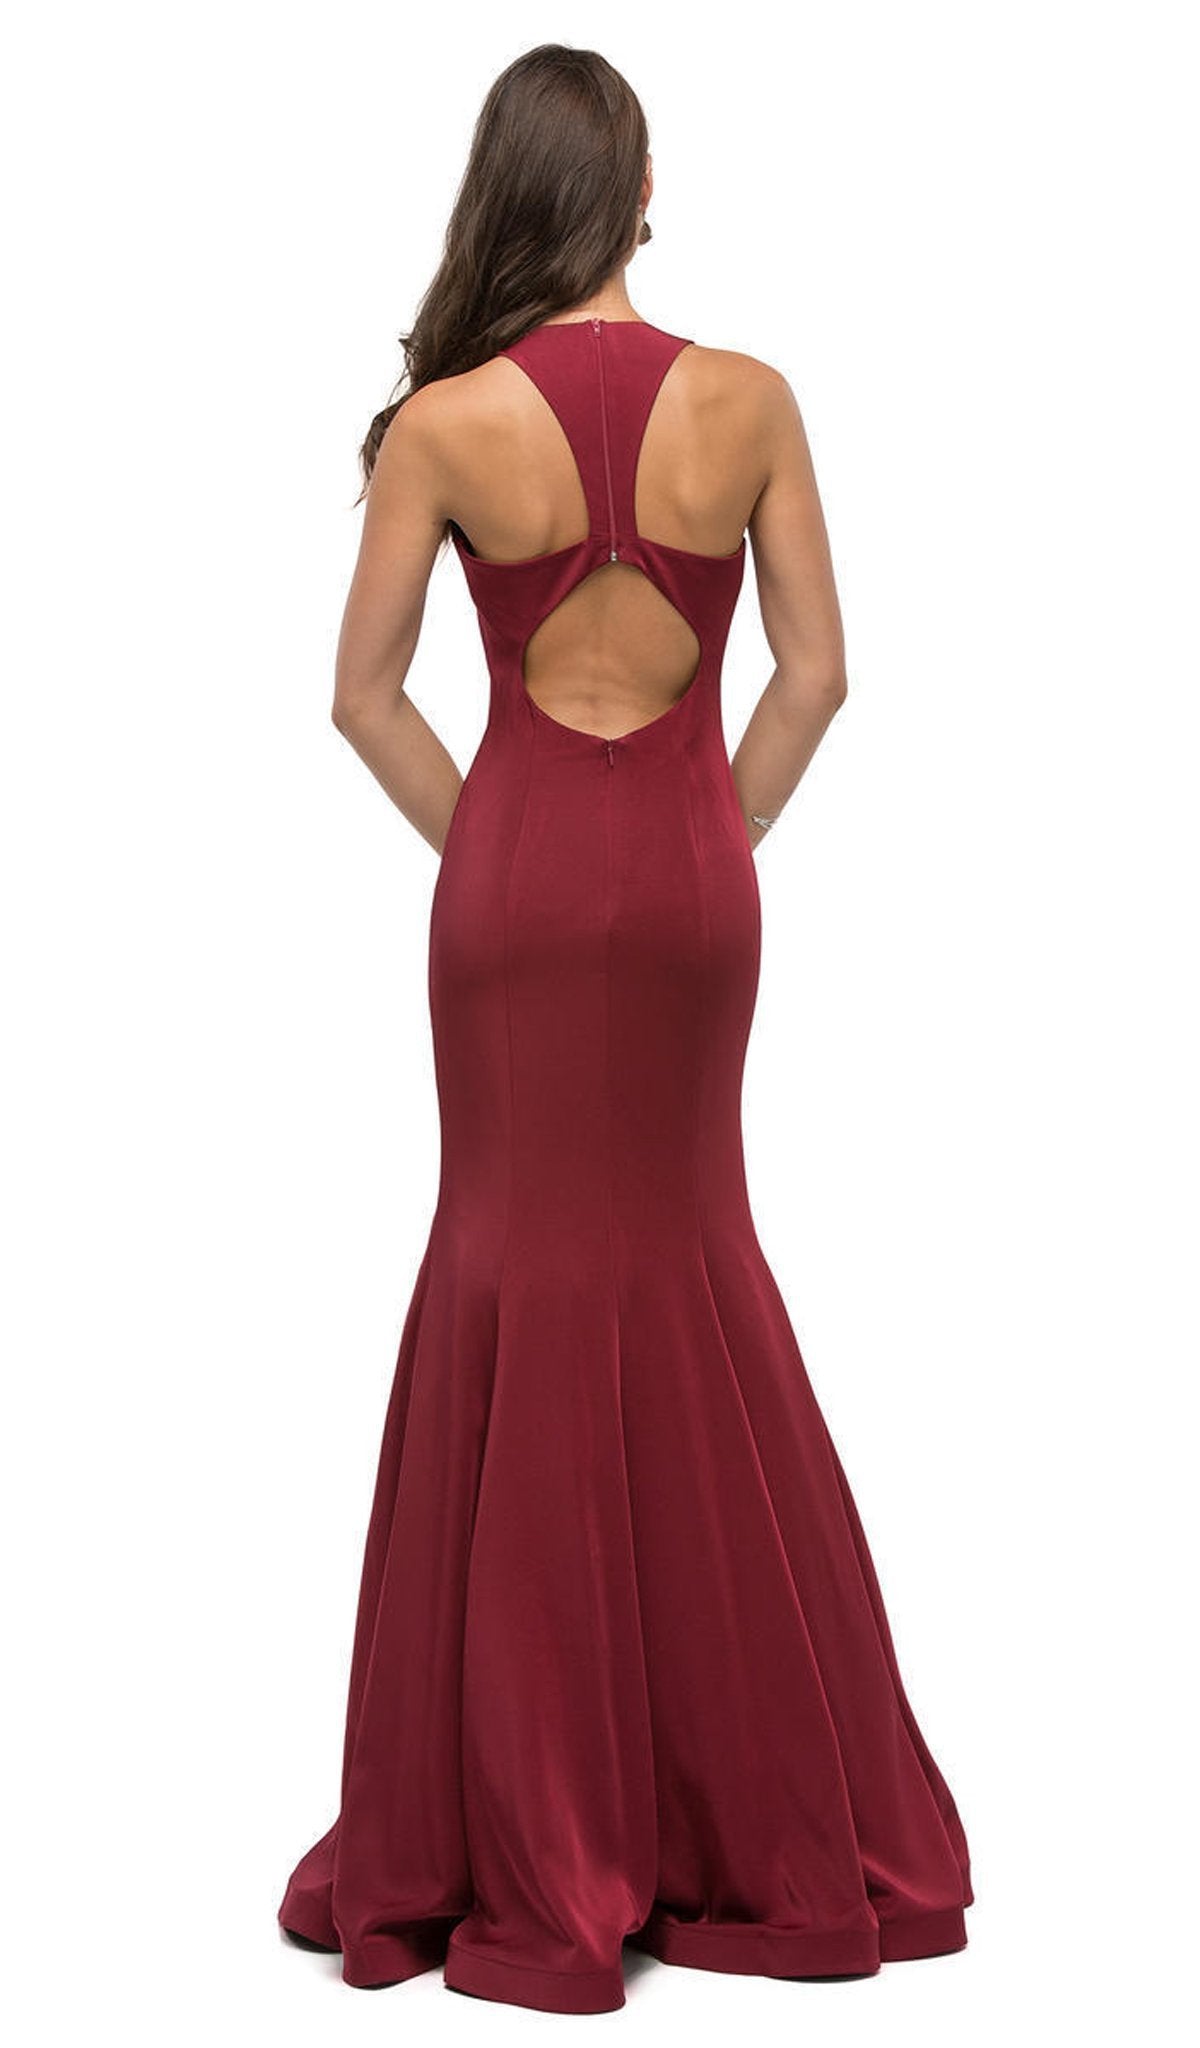 Dancing Queen - 9637 Magnificent V-Neck Racer Back Prom Dress Special Occasion Dress